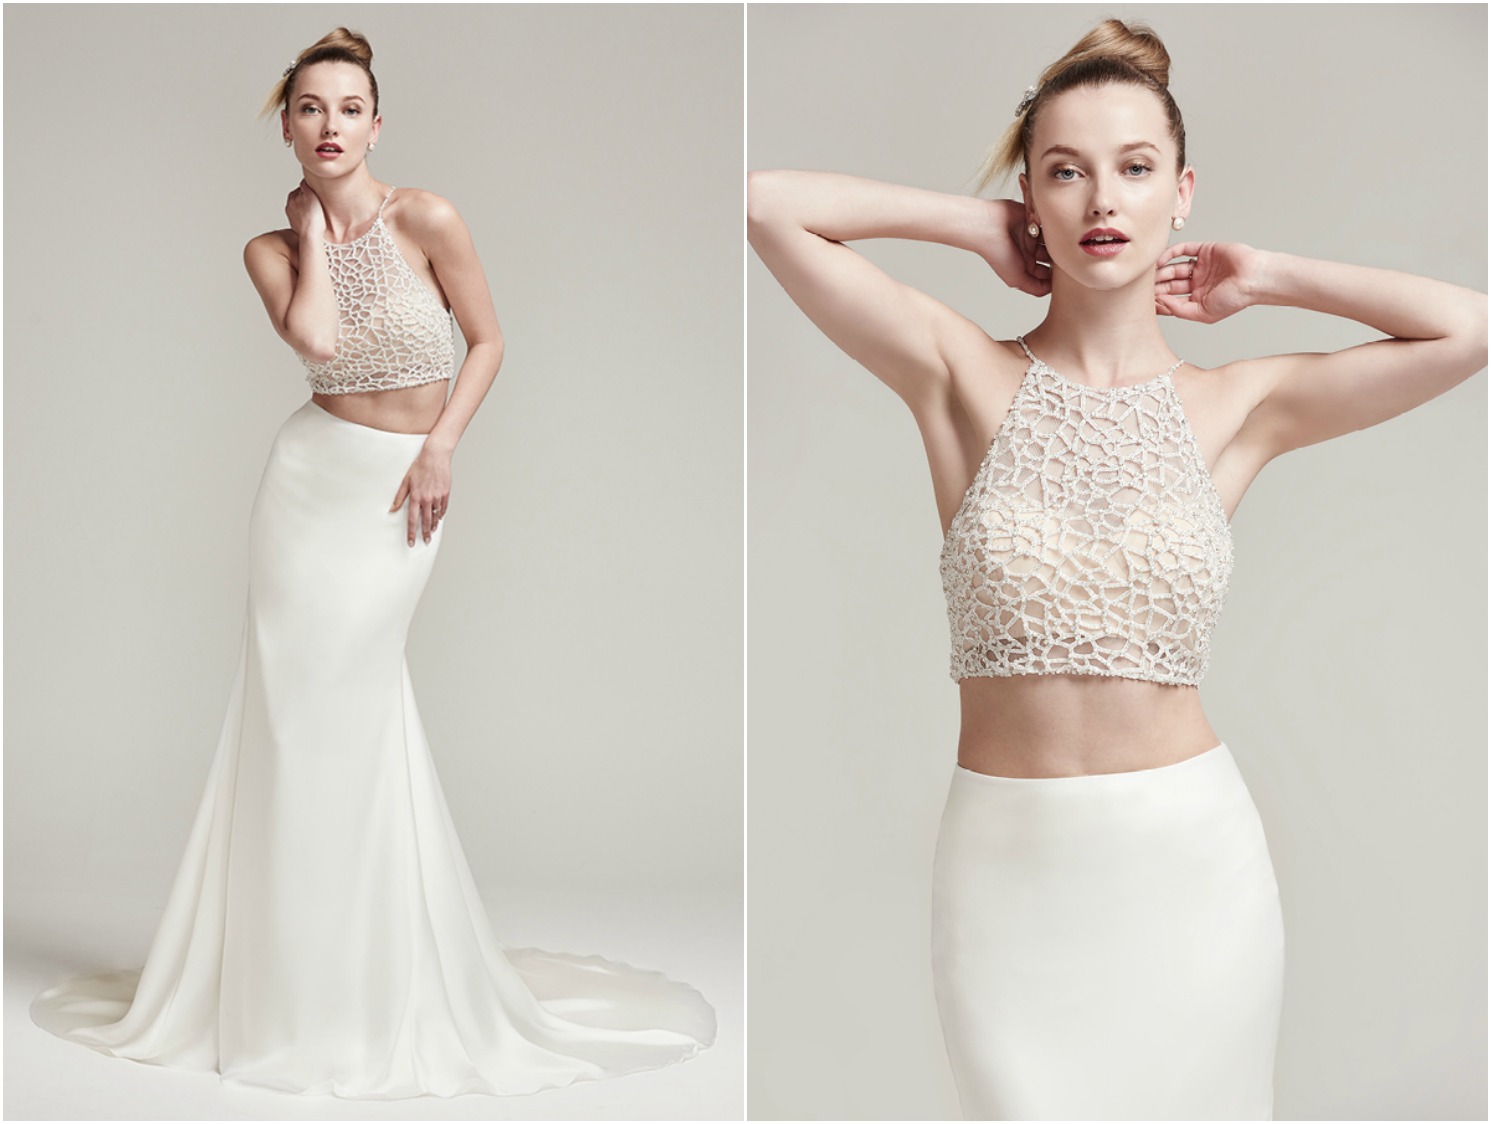 Sophisticated bead encrusted cropped halter with crystal button closure and bandeau lining. Orion Crepe back satin sheath skirt with zipper closure.

<a href="https://www.maggiesottero.com/sottero-and-midgley/jude-alliett/9964" target="_blank">Sottero &amp; Midgley</a>